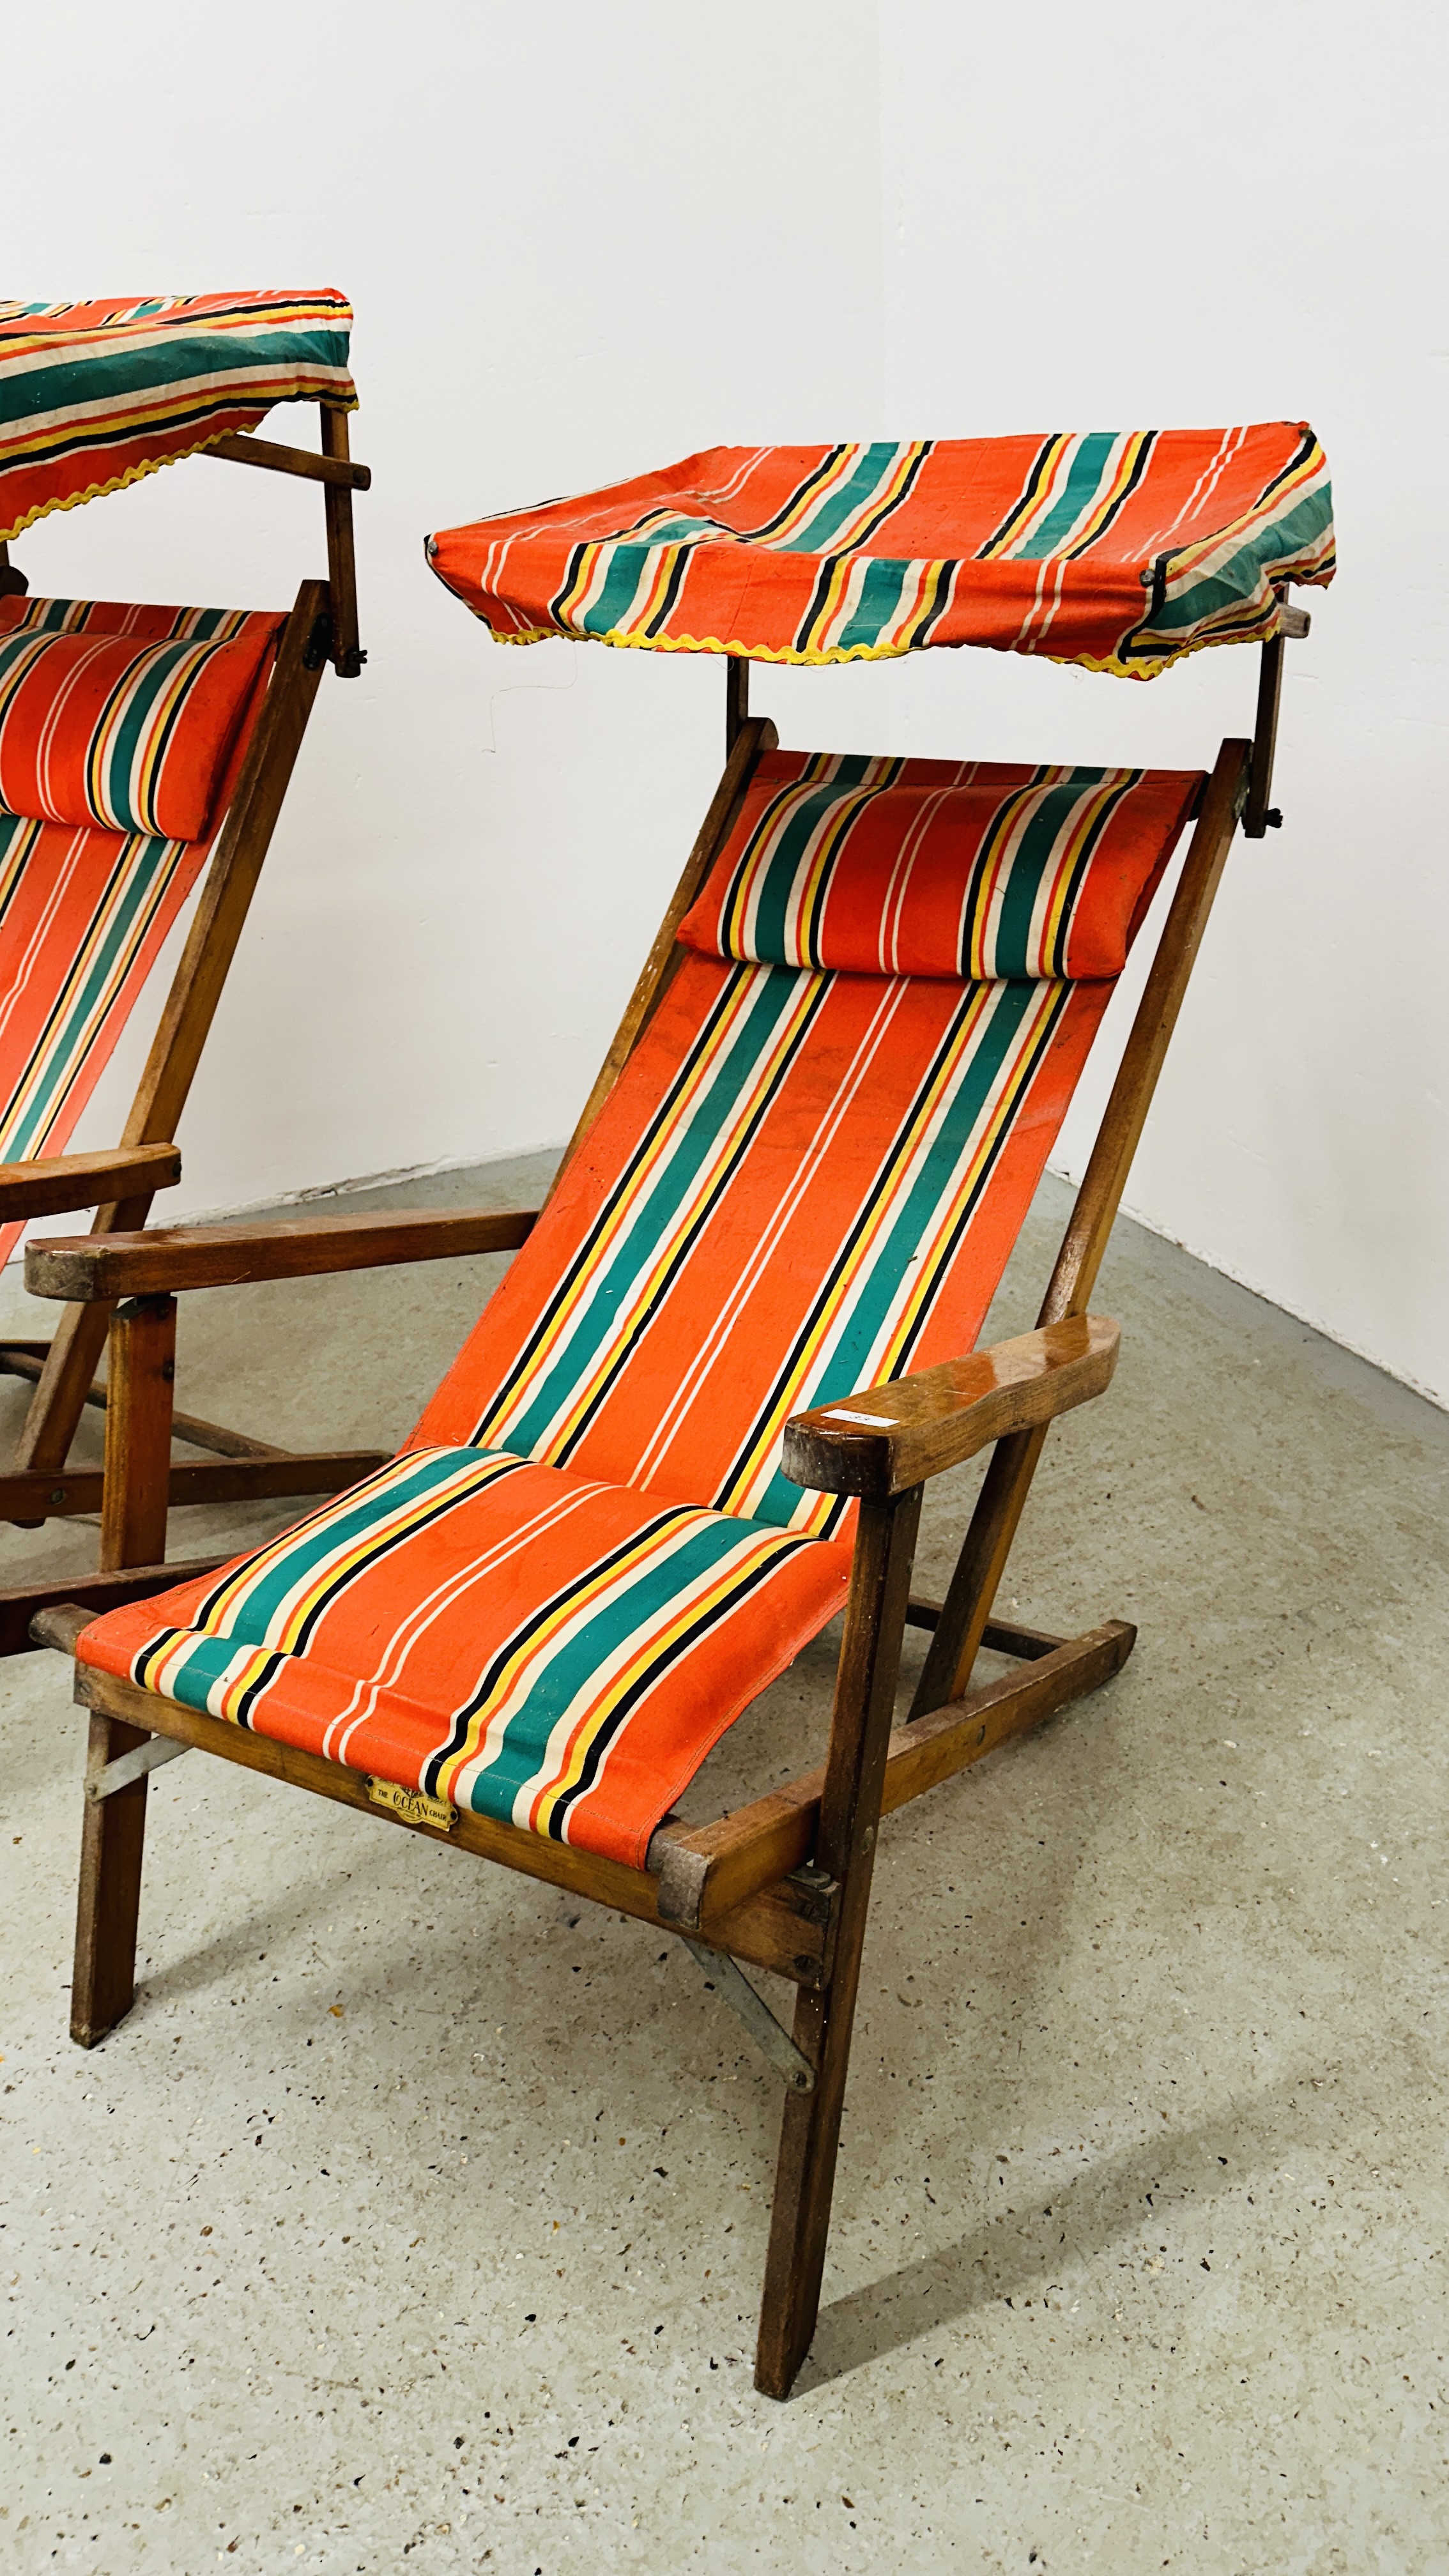 A PAIR OF GEEBRO "THE OCEAN CHAIR" DECK CHAIRS WITH SUN SHADES. - Image 13 of 13